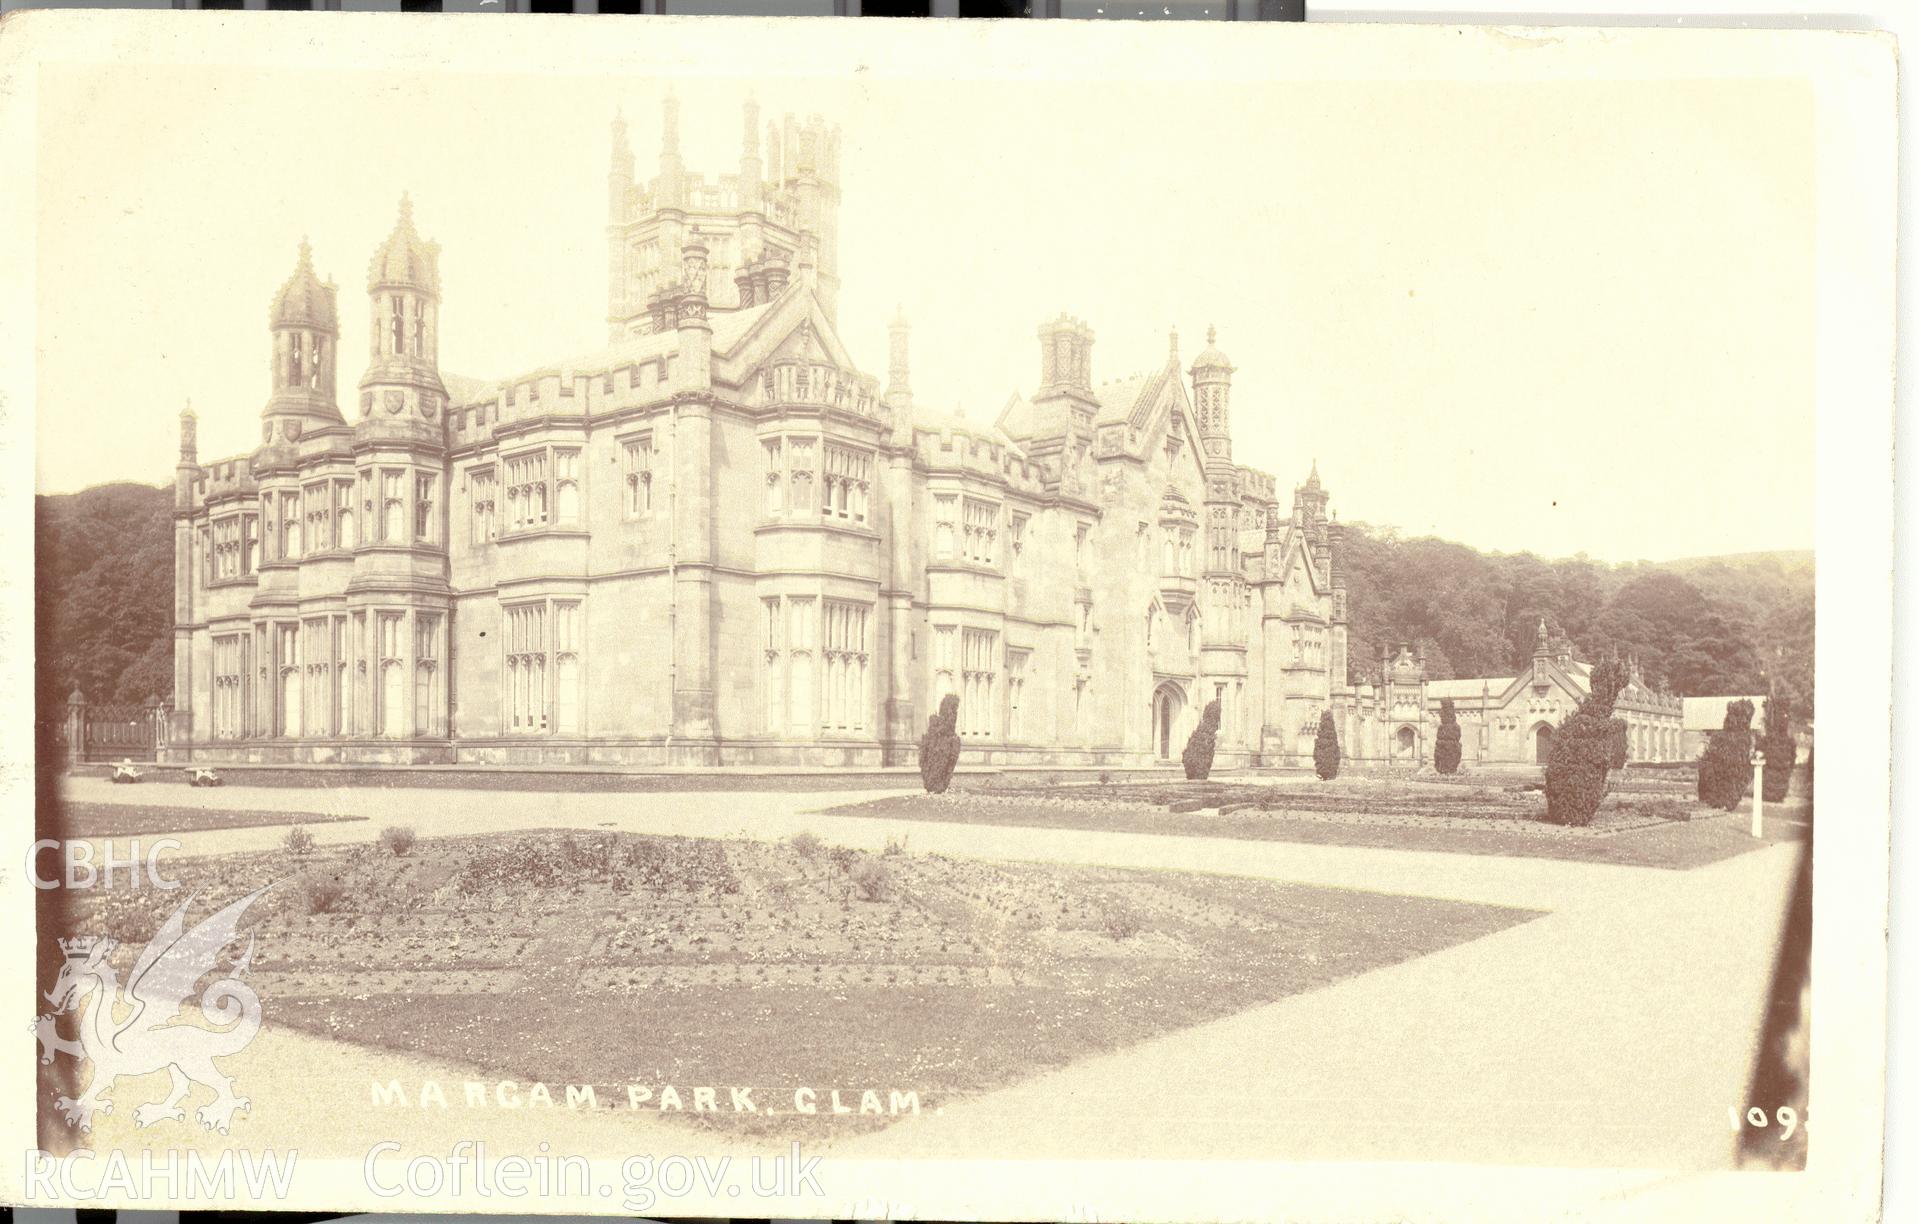 Digitised postcard image of Margam Castle, the Miles Series, Ewenny Road Studio, Bridgend. Produced by Parks and Gardens Data Services, from an original item in the Peter Davis Collection at Parks and Gardens UK. We hold only web-resolution images of this collection, suitable for viewing on screen and for research purposes only. We do not hold the original images, or publication quality scans.